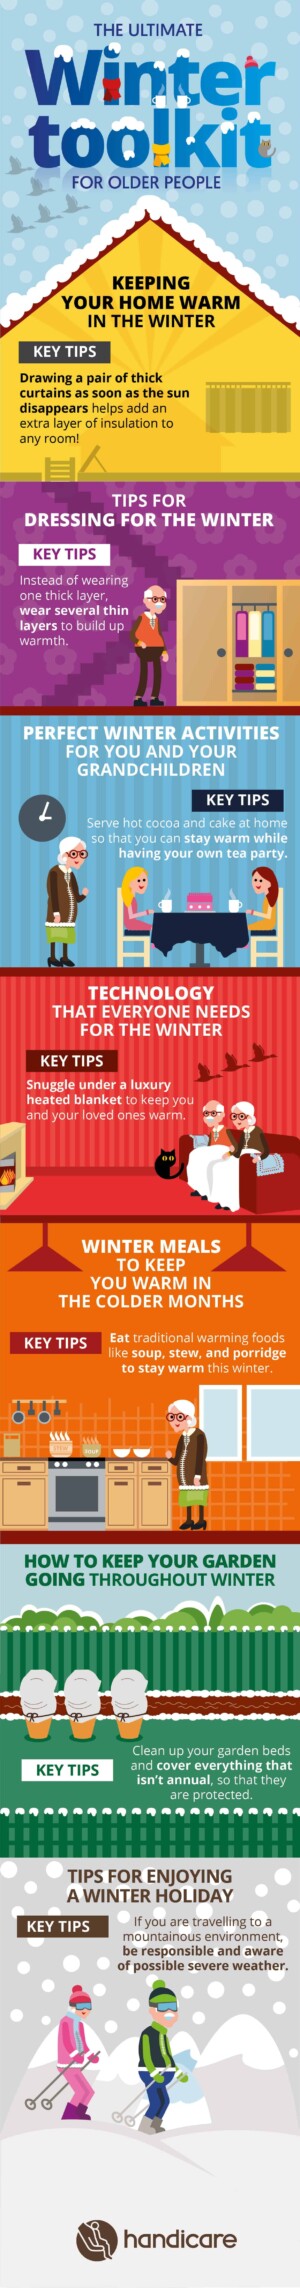 The Ultimate Winter Toolkit for Older People